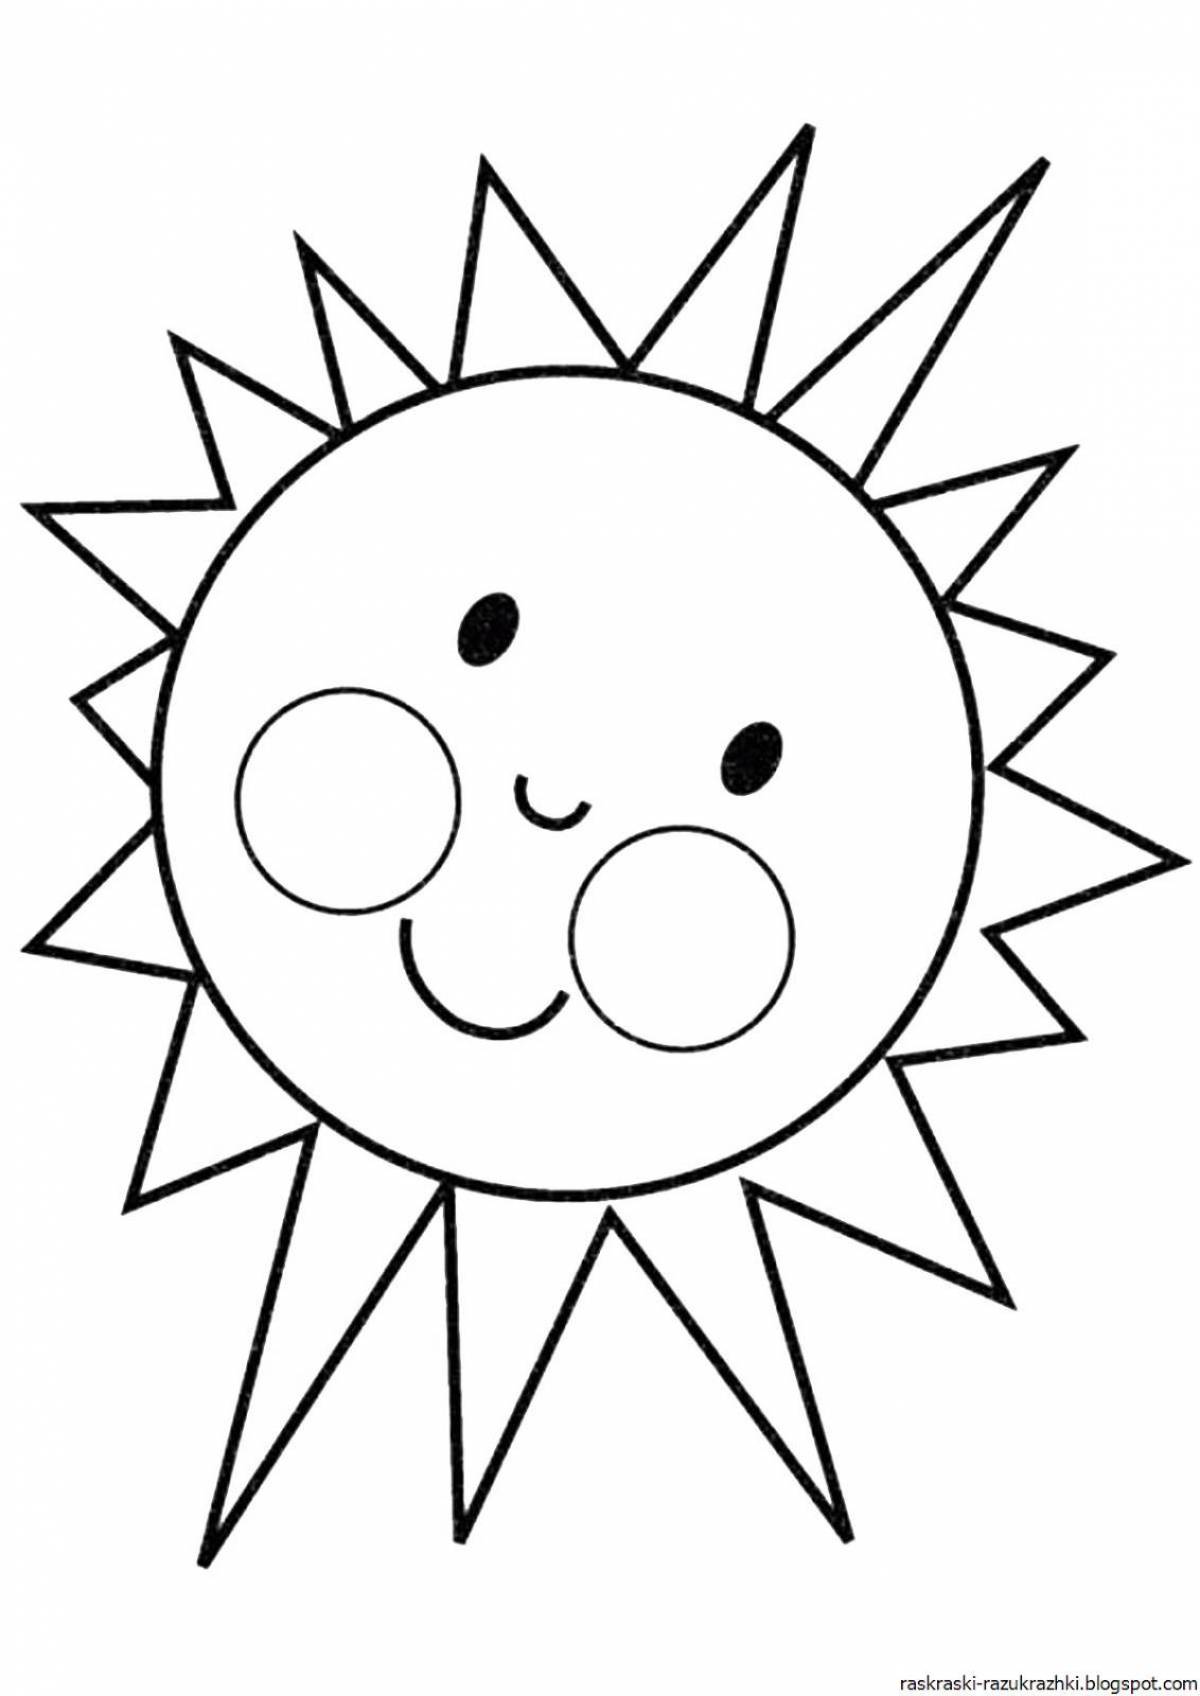 Children's sun coloring book for kids